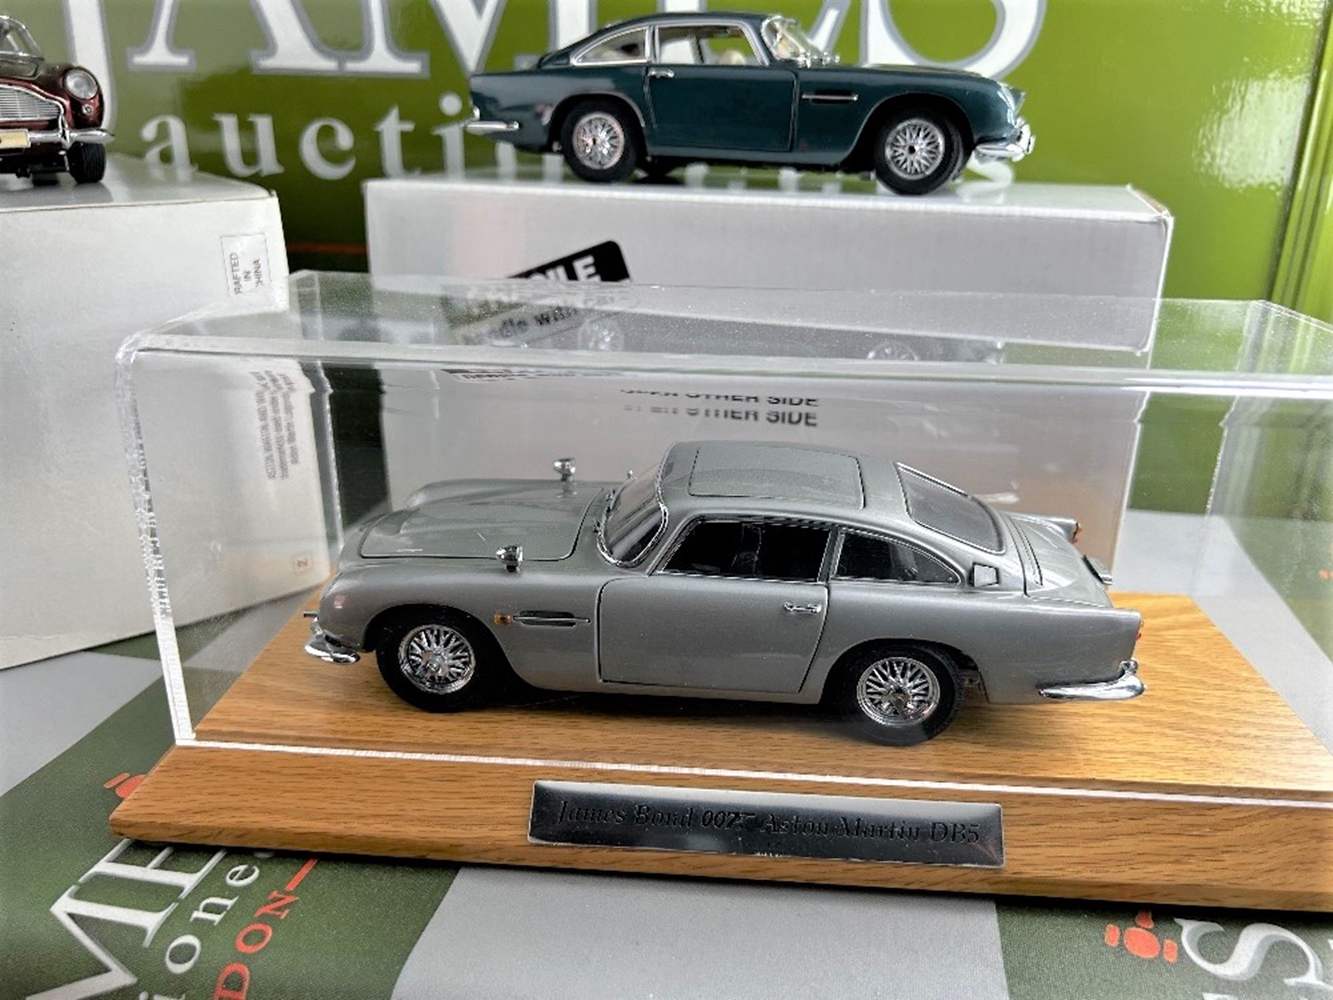 Danbury Mint 1964 Aston Martin DB5 Complete Collection - Image 3 of 8